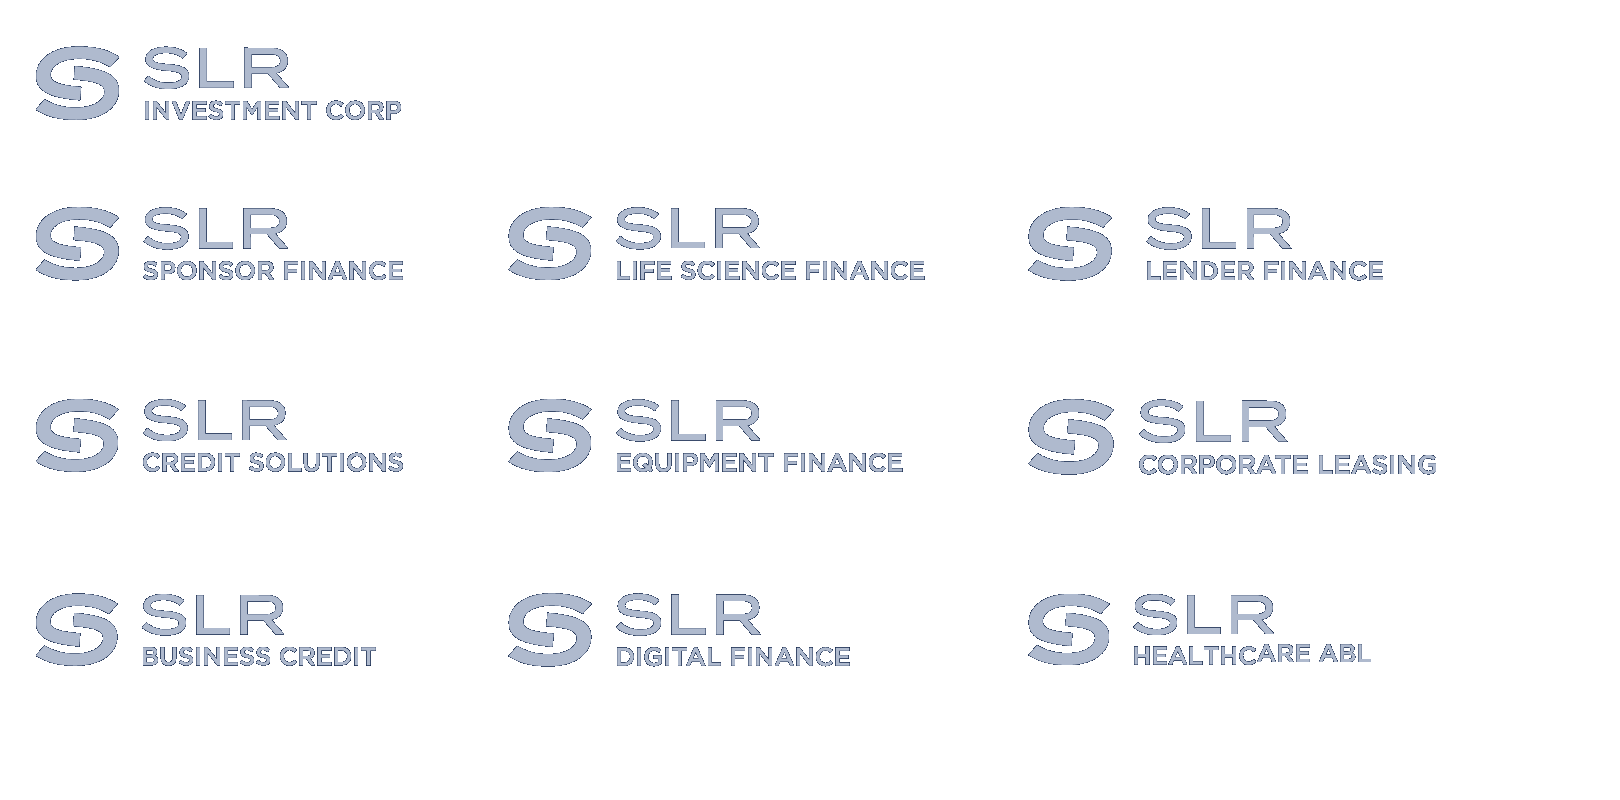 All SLR entities